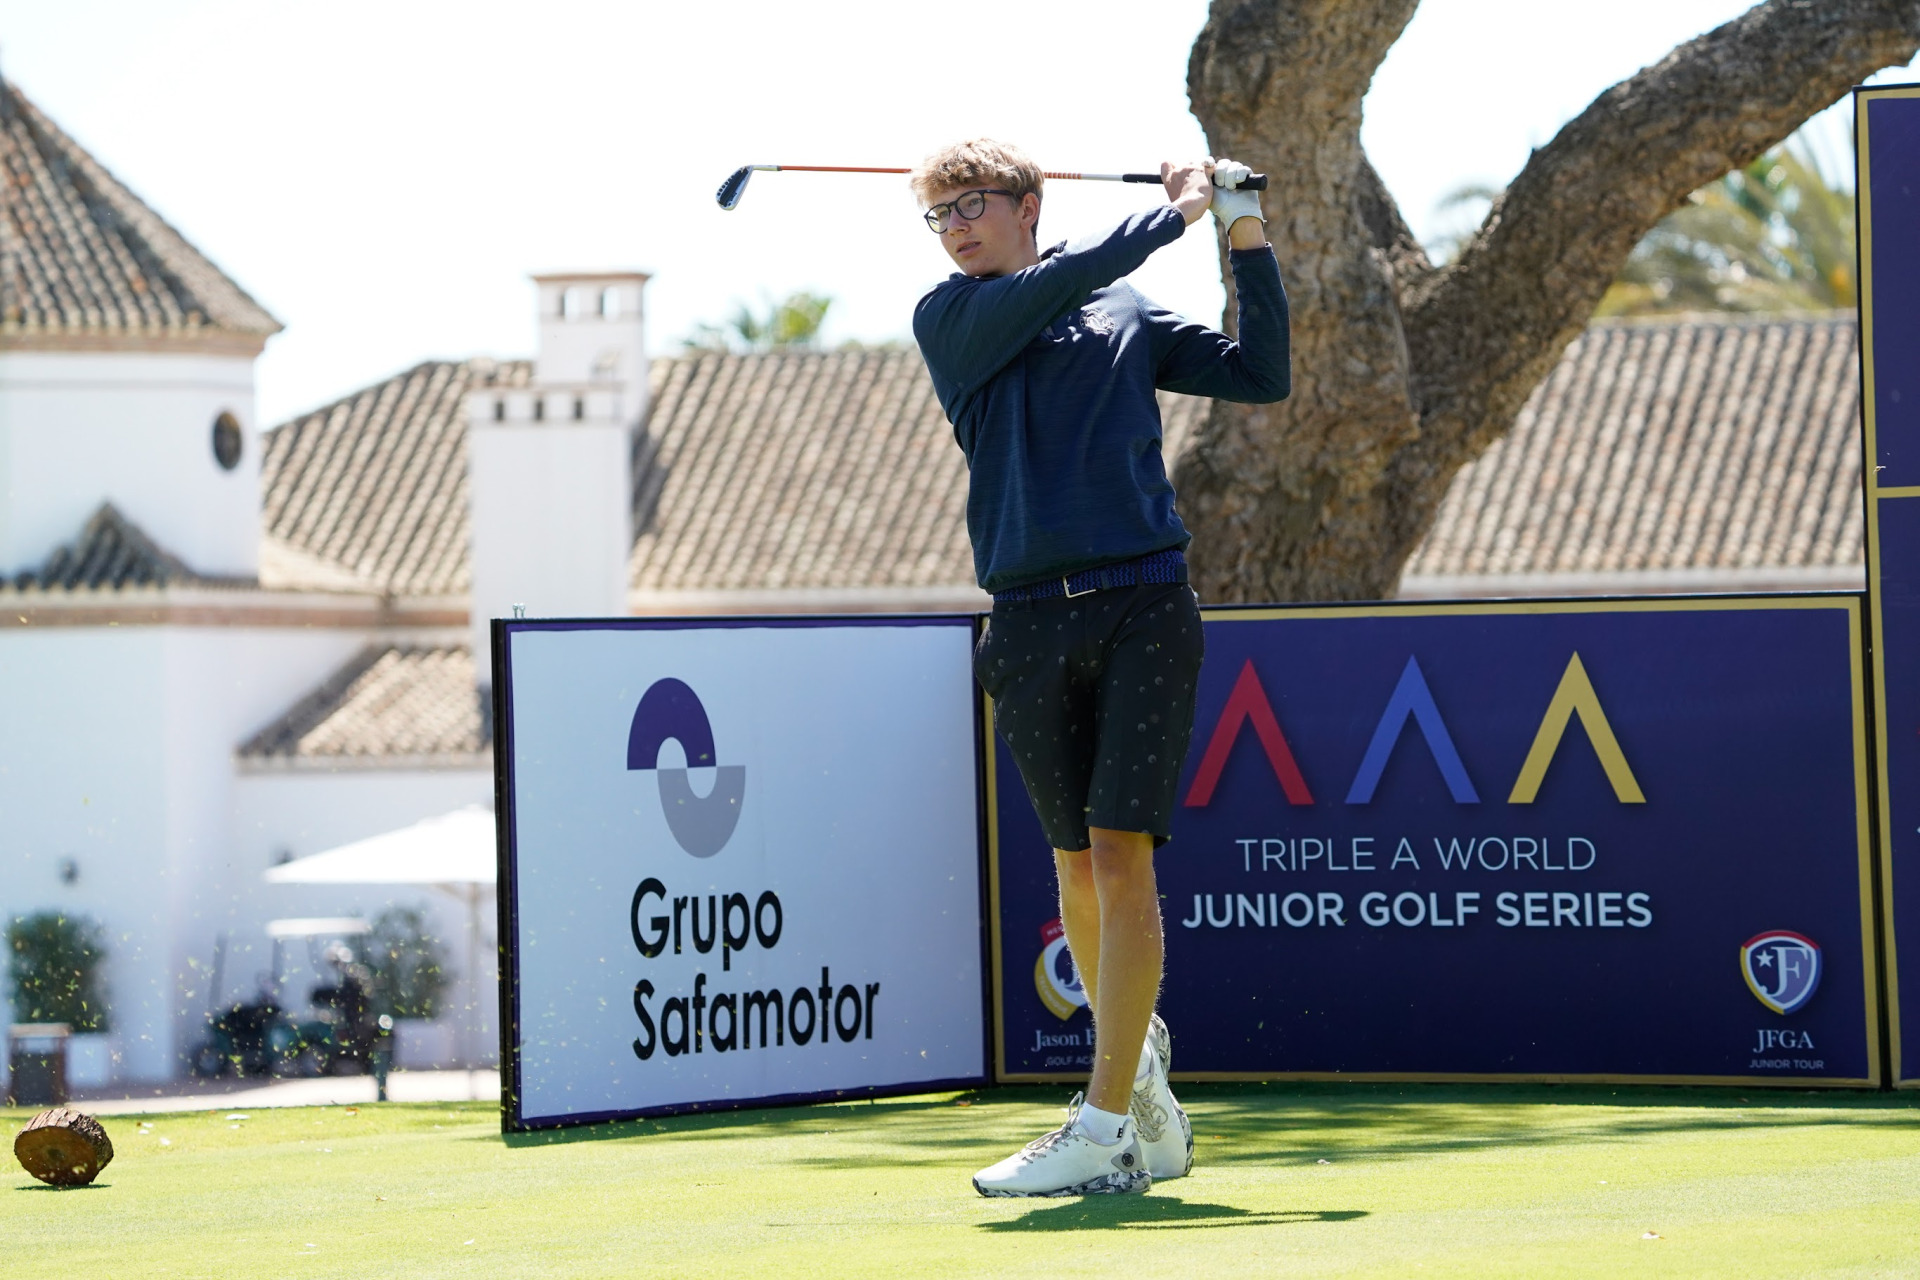 Richard Teder, 2023 winner of the Triple A World Junior Golf Series Final on the first tee at The San Roque Club, Old Course.